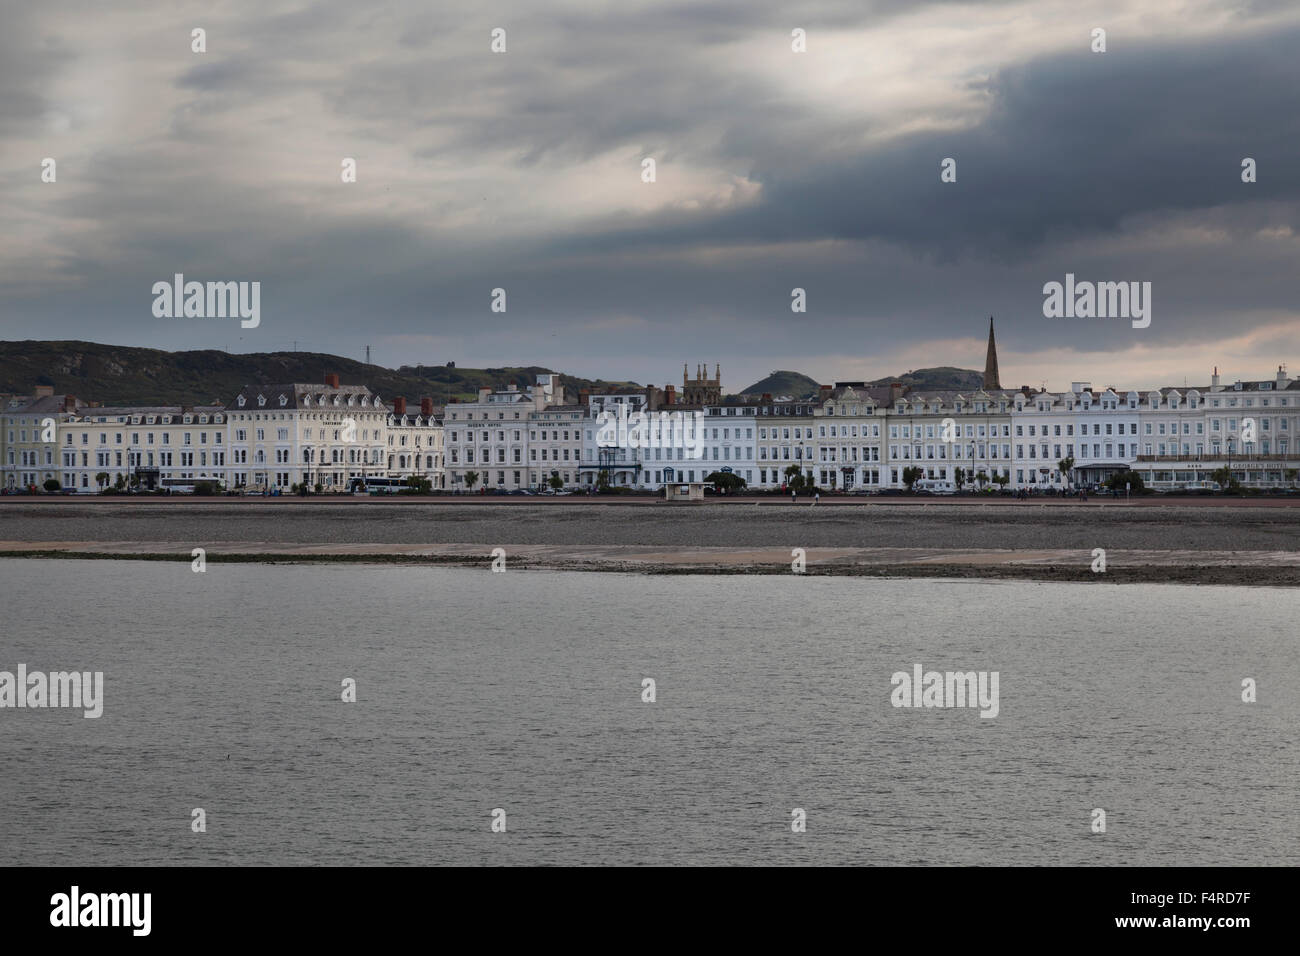 View of moody skies from pier across to Llandudno 's sea front hotels Stock Photo